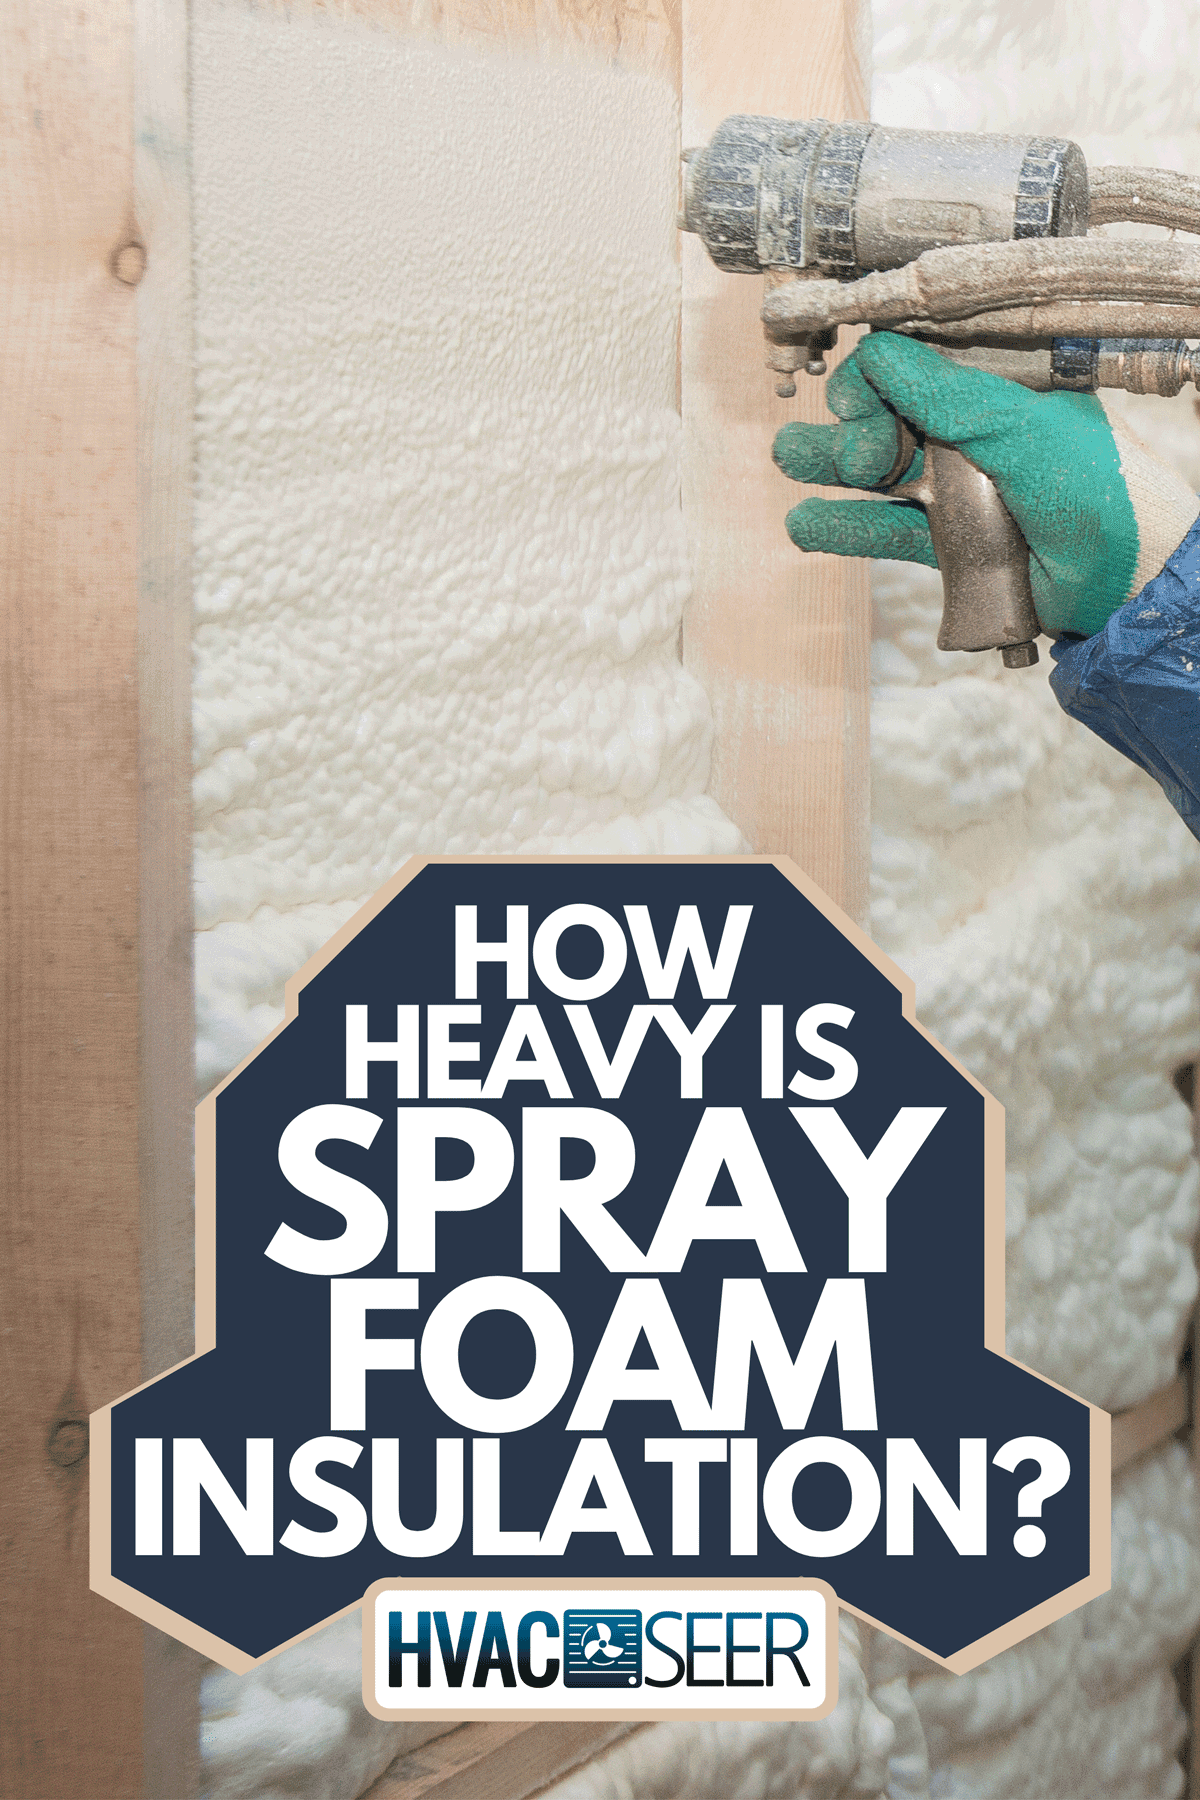 A foam is applied to the walls to warm the house, How Heavy Is Spray Foam Insulation?